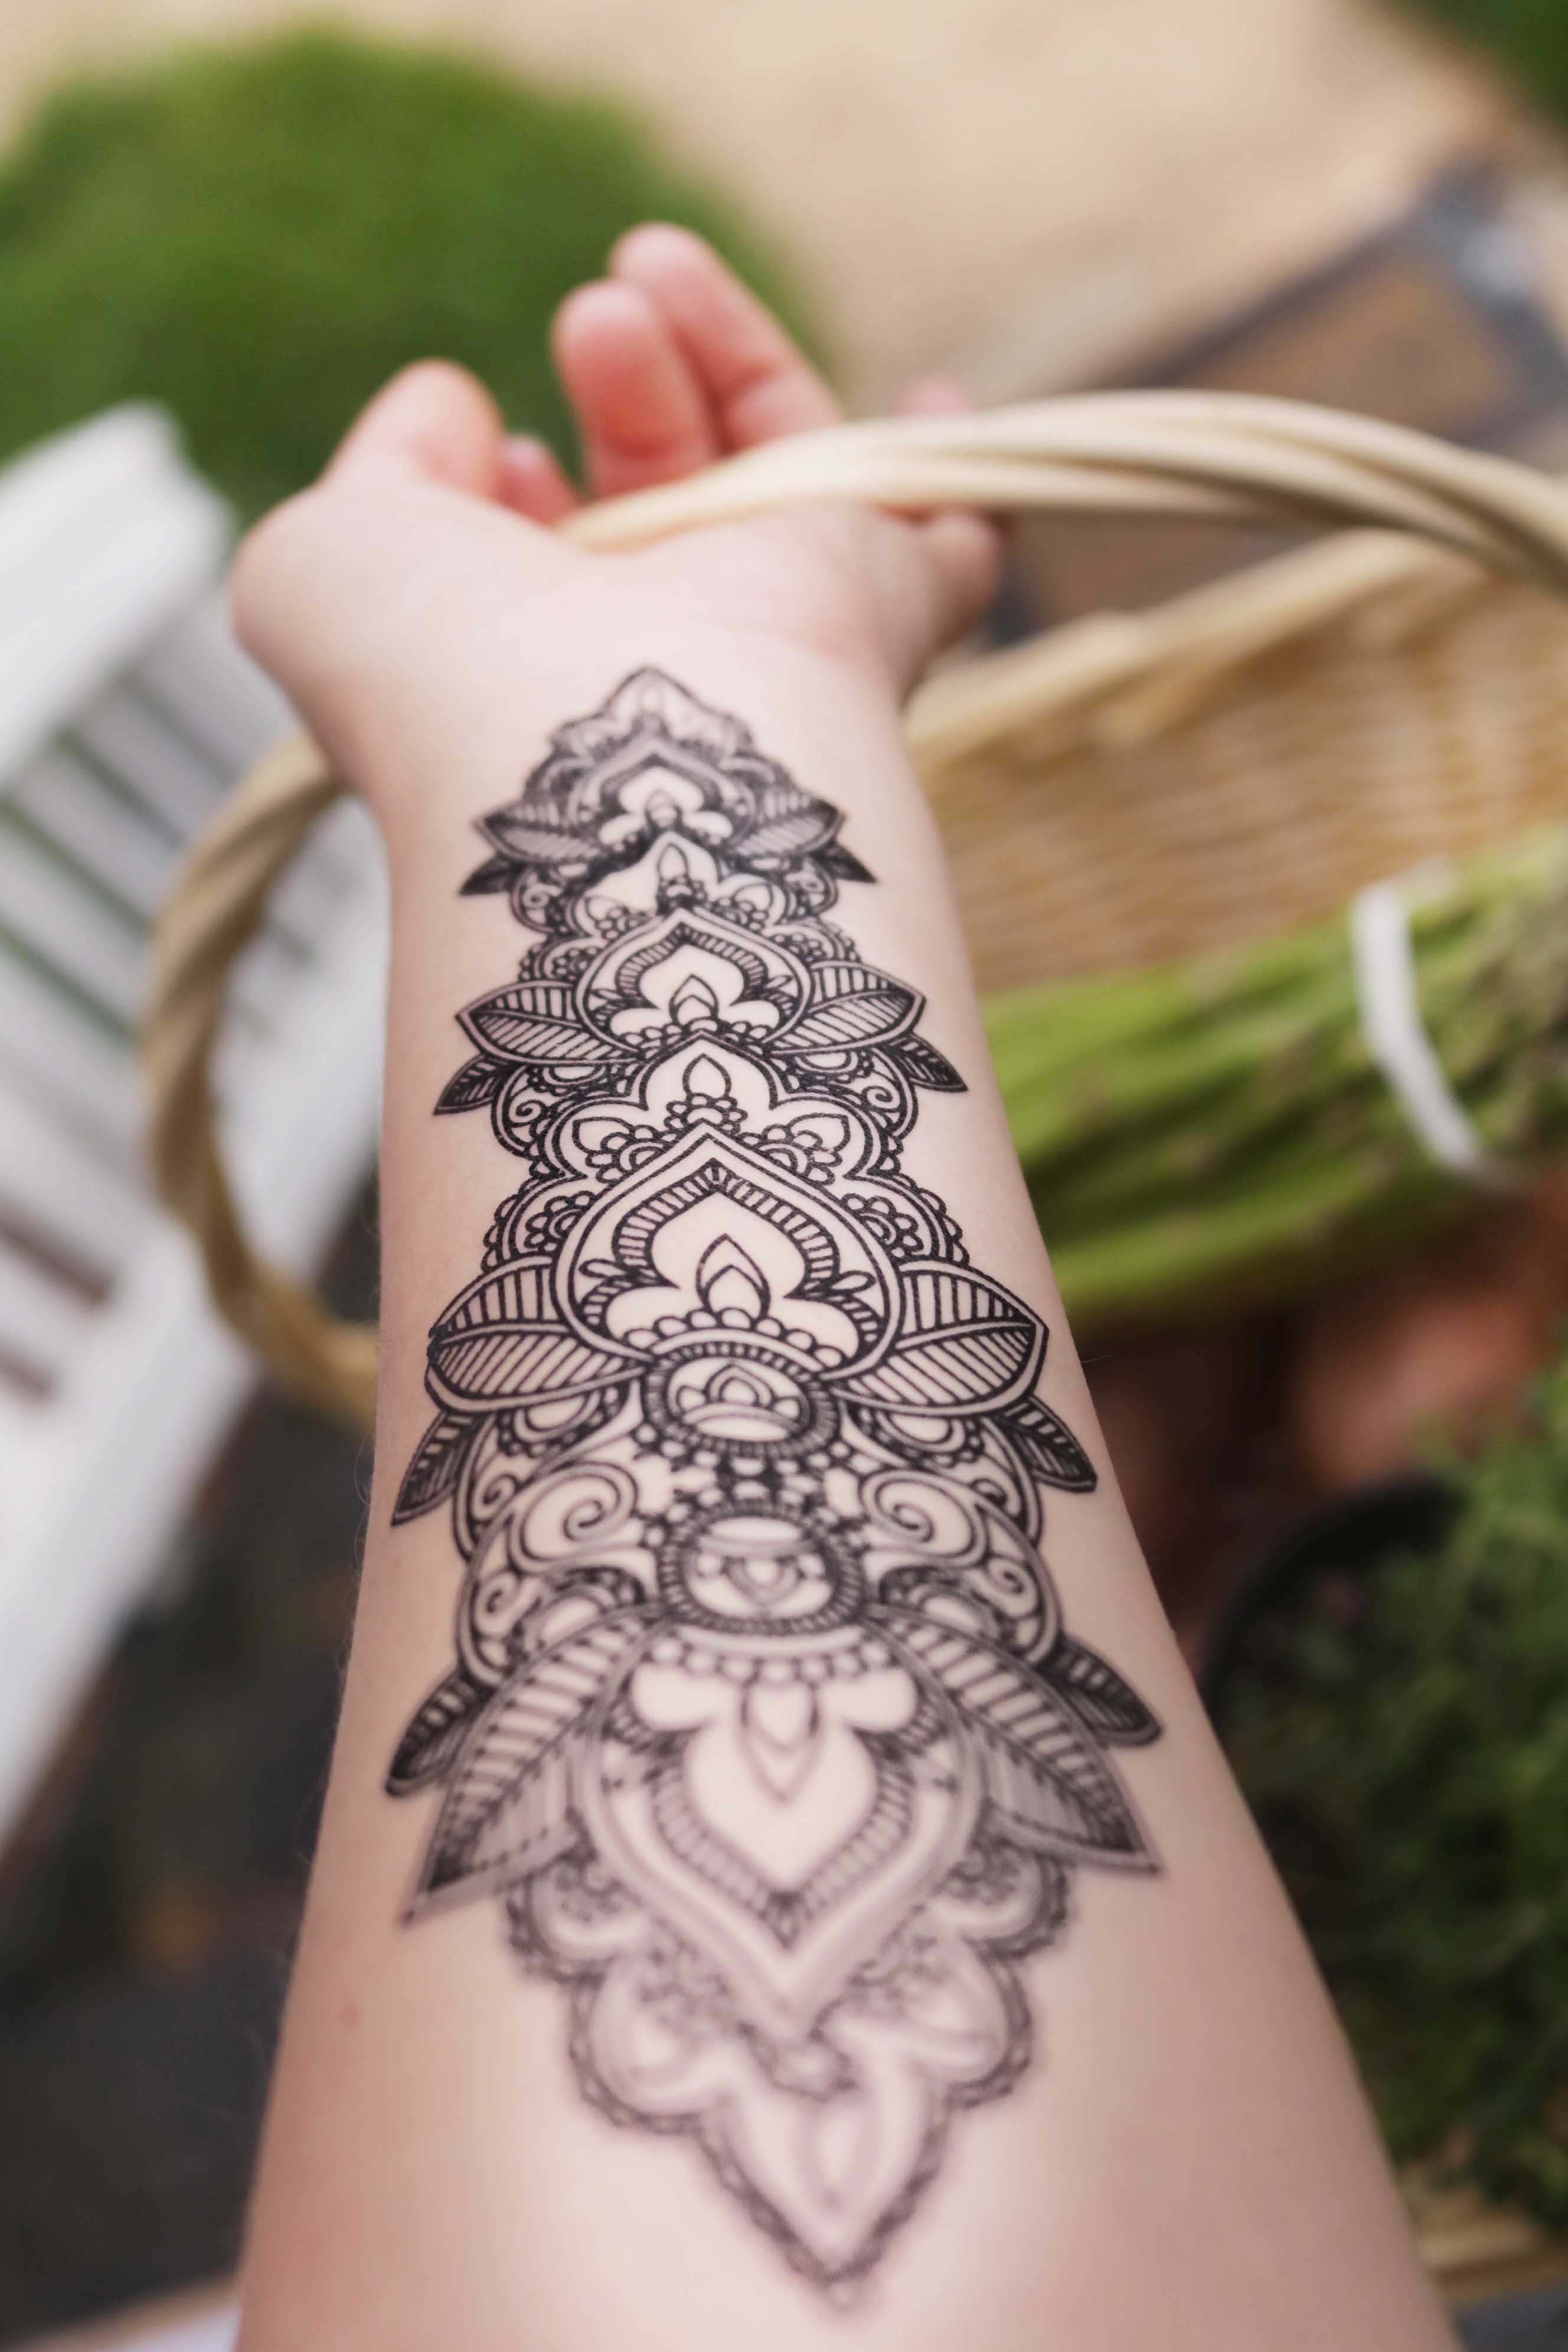 Spiritual Tattoos Meaning: Unraveling the Stories Behind Symbolic Body Art